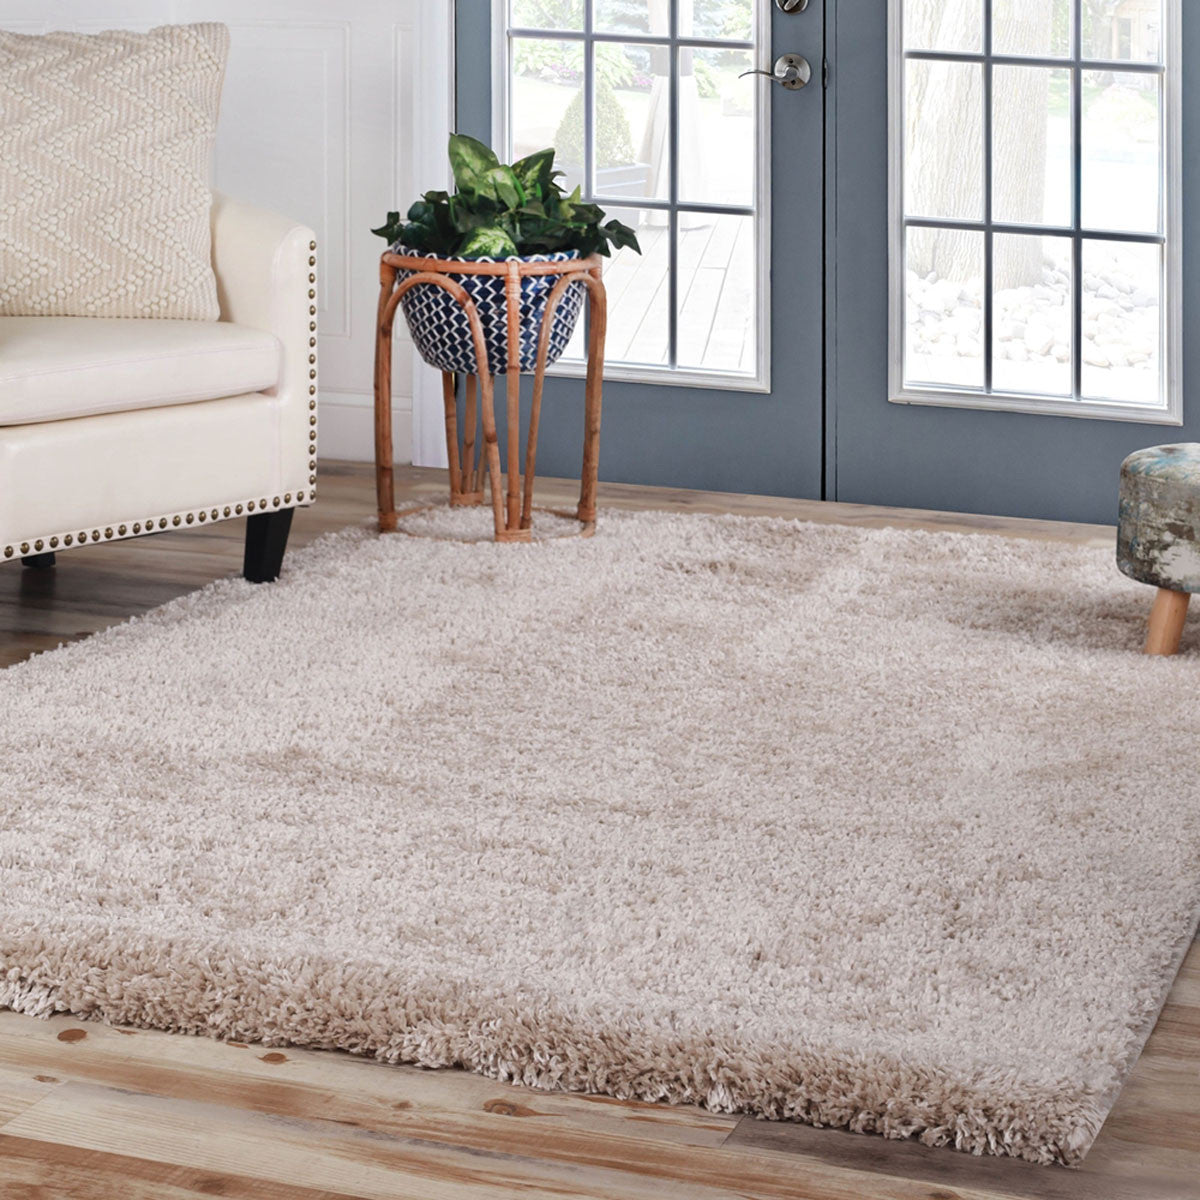 4' X 6' Beige Shag Stain Resistant Area Rug